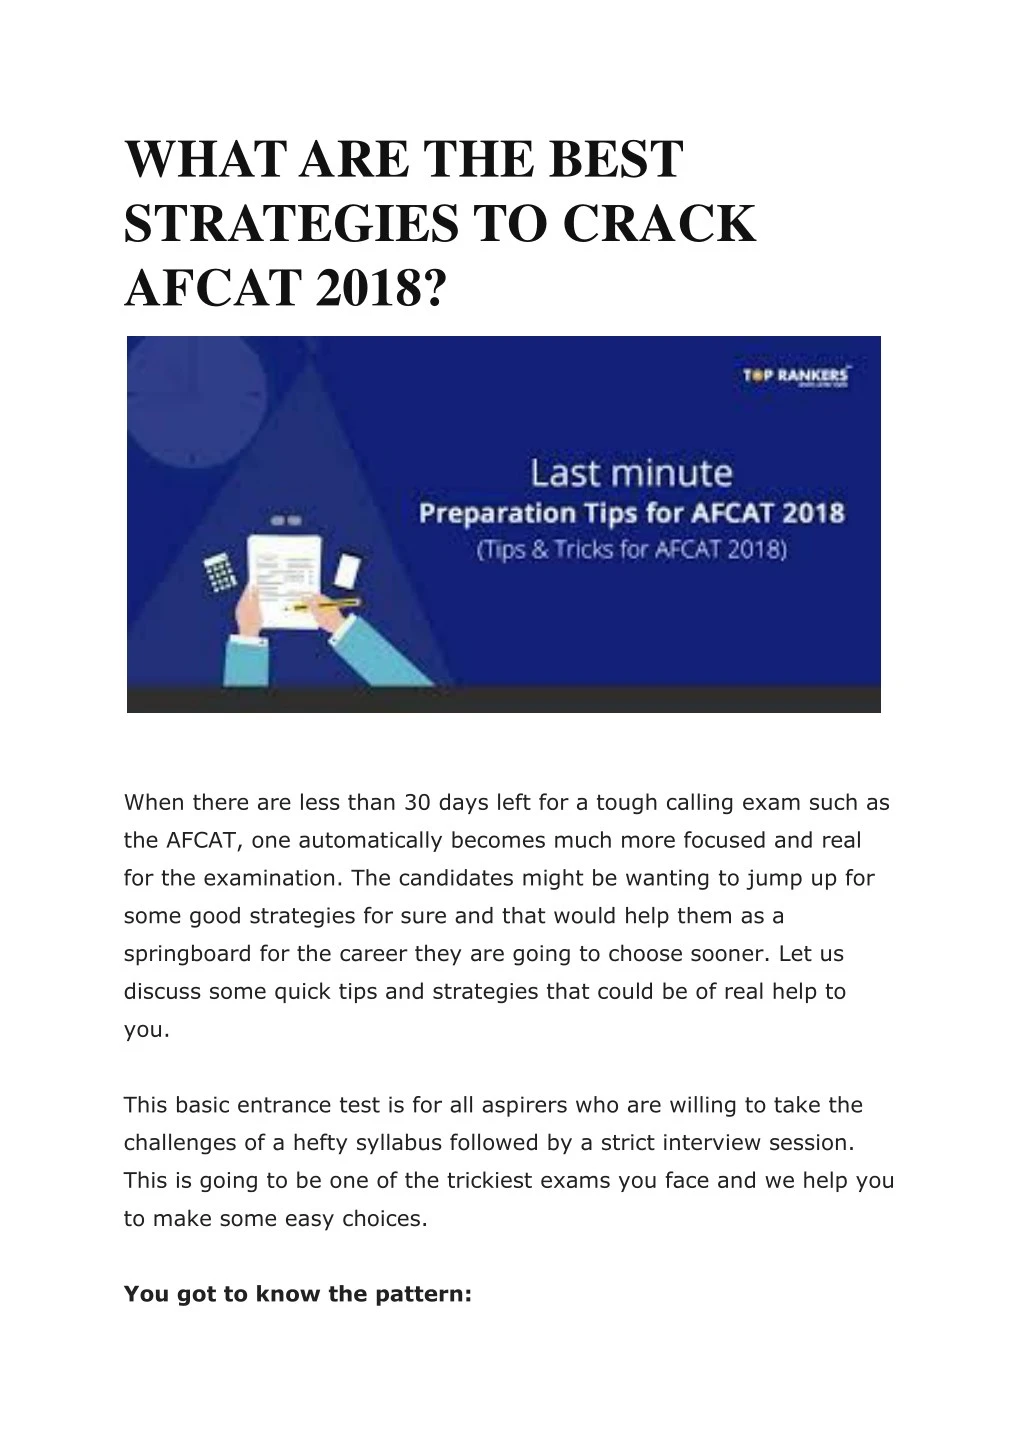 what are the best strategies to crack afcat 2018